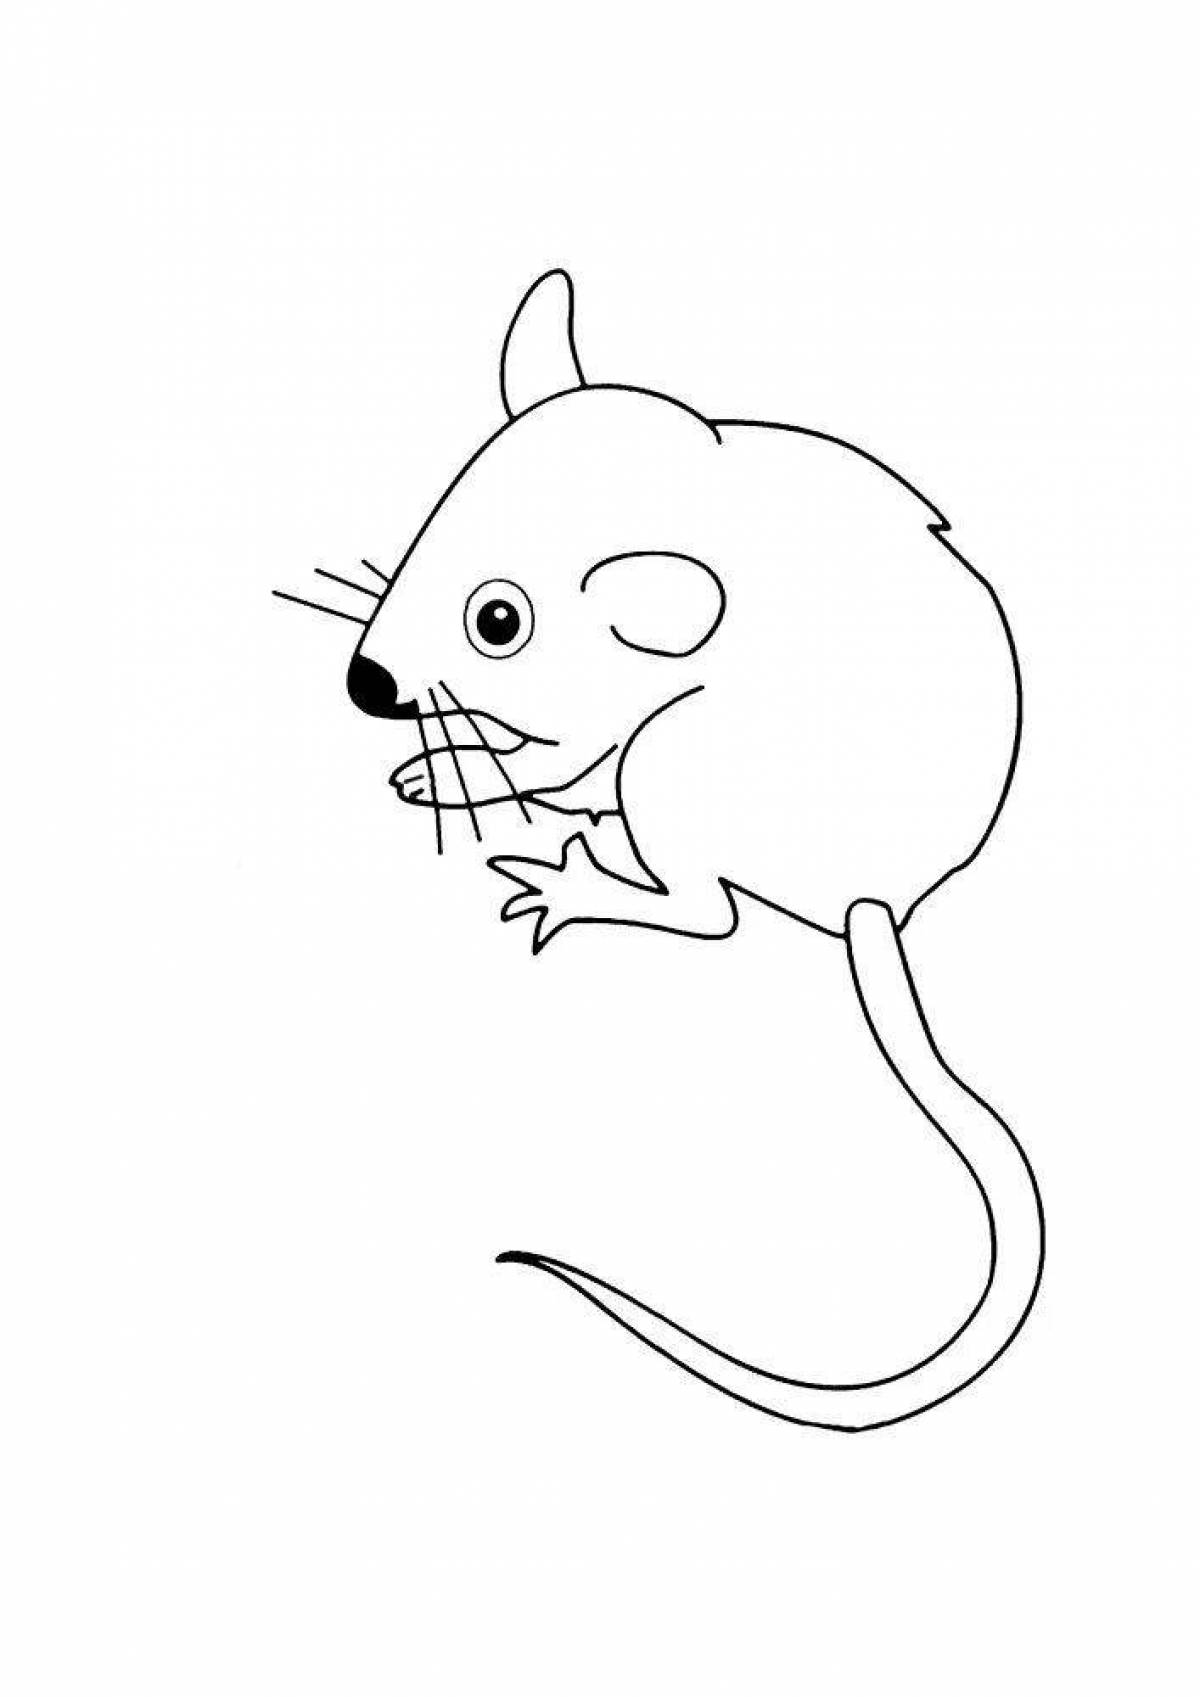 Coloring book enchanting mouse tim